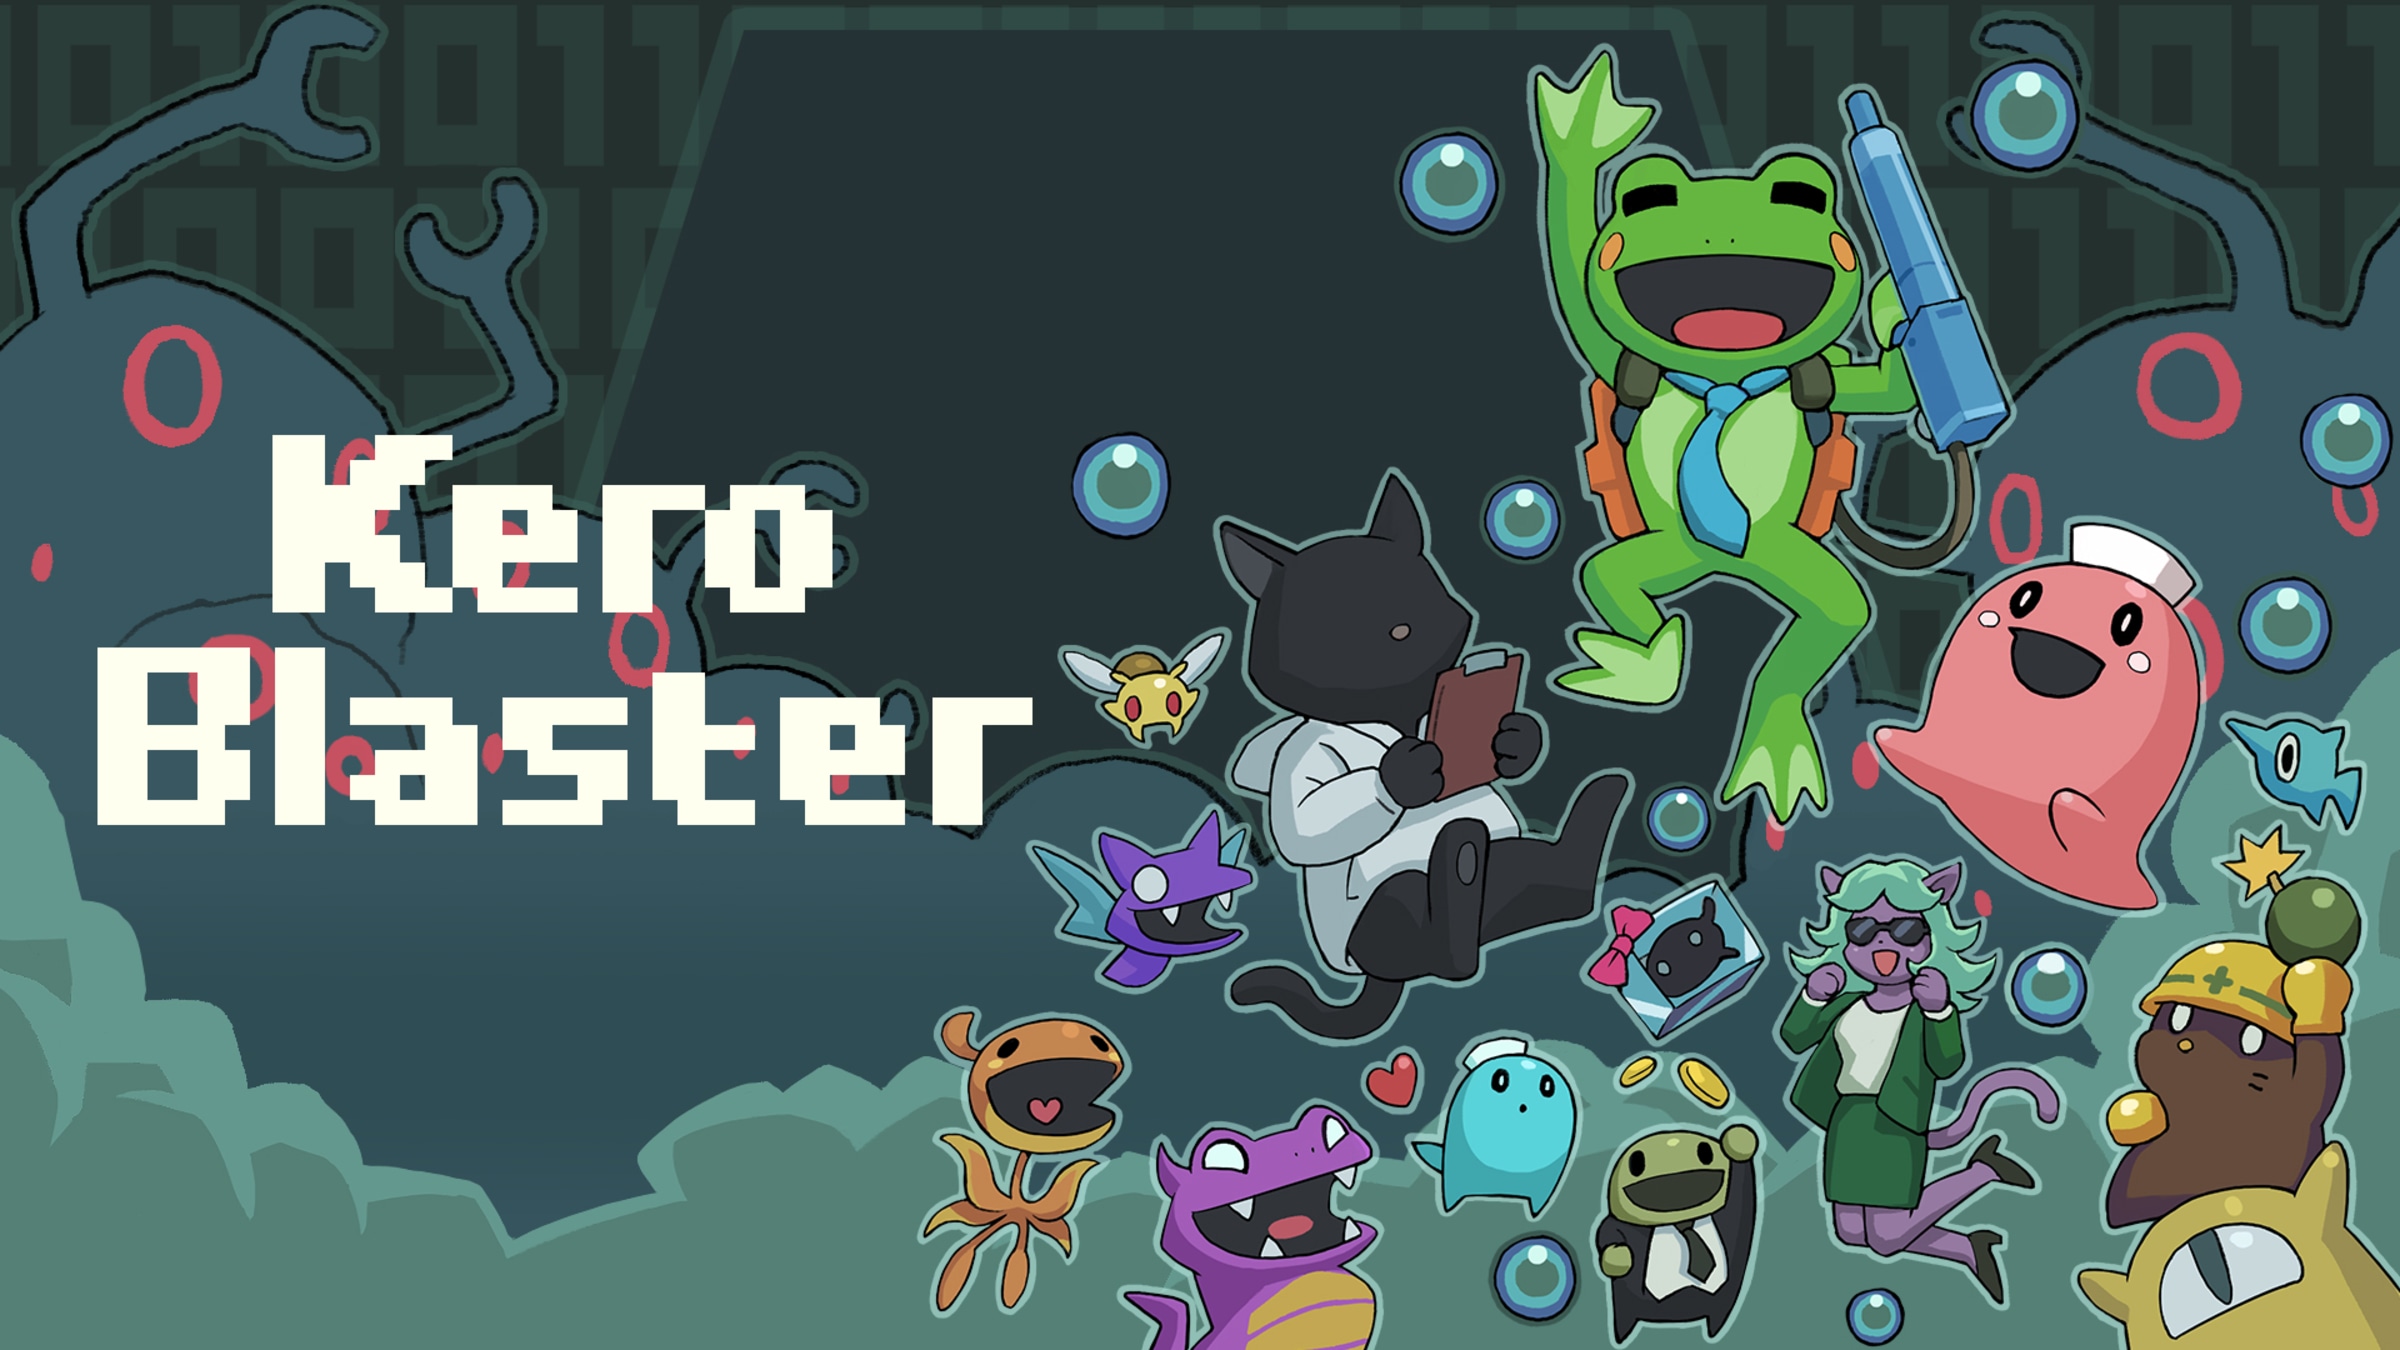 1Print Games Reveals Kero Blaster, Ittle Dew, And Death Squared Physical  Editions For Switch : r/NintendoSwitch